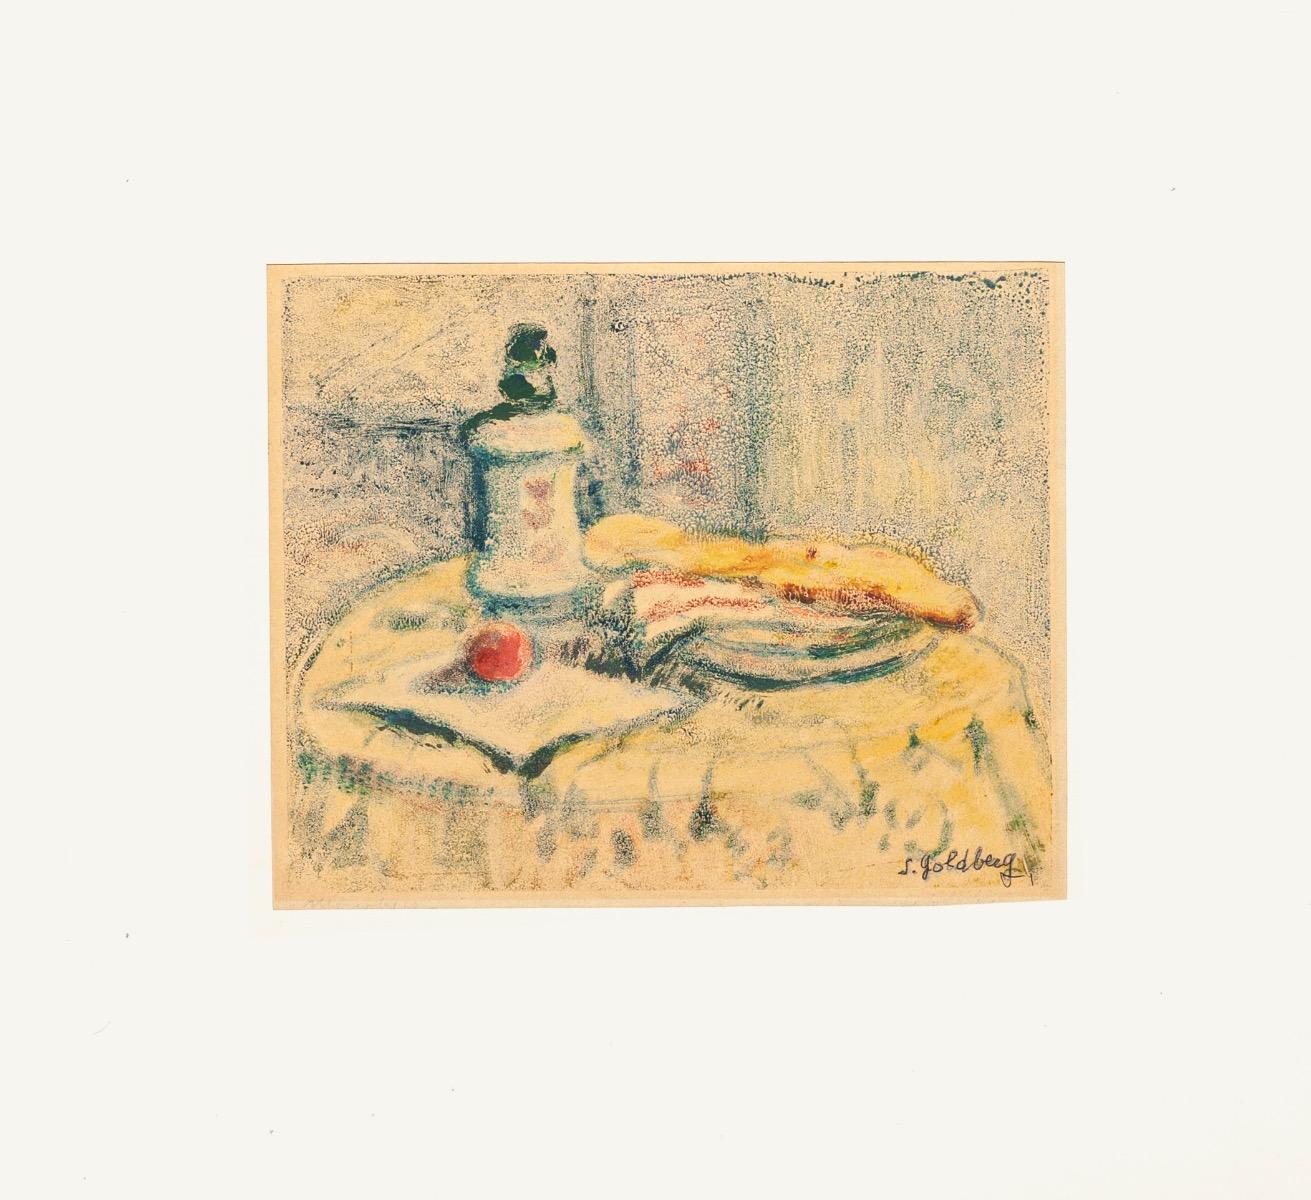 Still Life is an original drawing in mixed media -pastel and watercolor- realized by Simon Goldberg (1913-1985). Hand-signed on the lower right.

The state of preservation is very good.

Sheet dimension:23 x 19 cm.

Included a Passepartout: 34 x